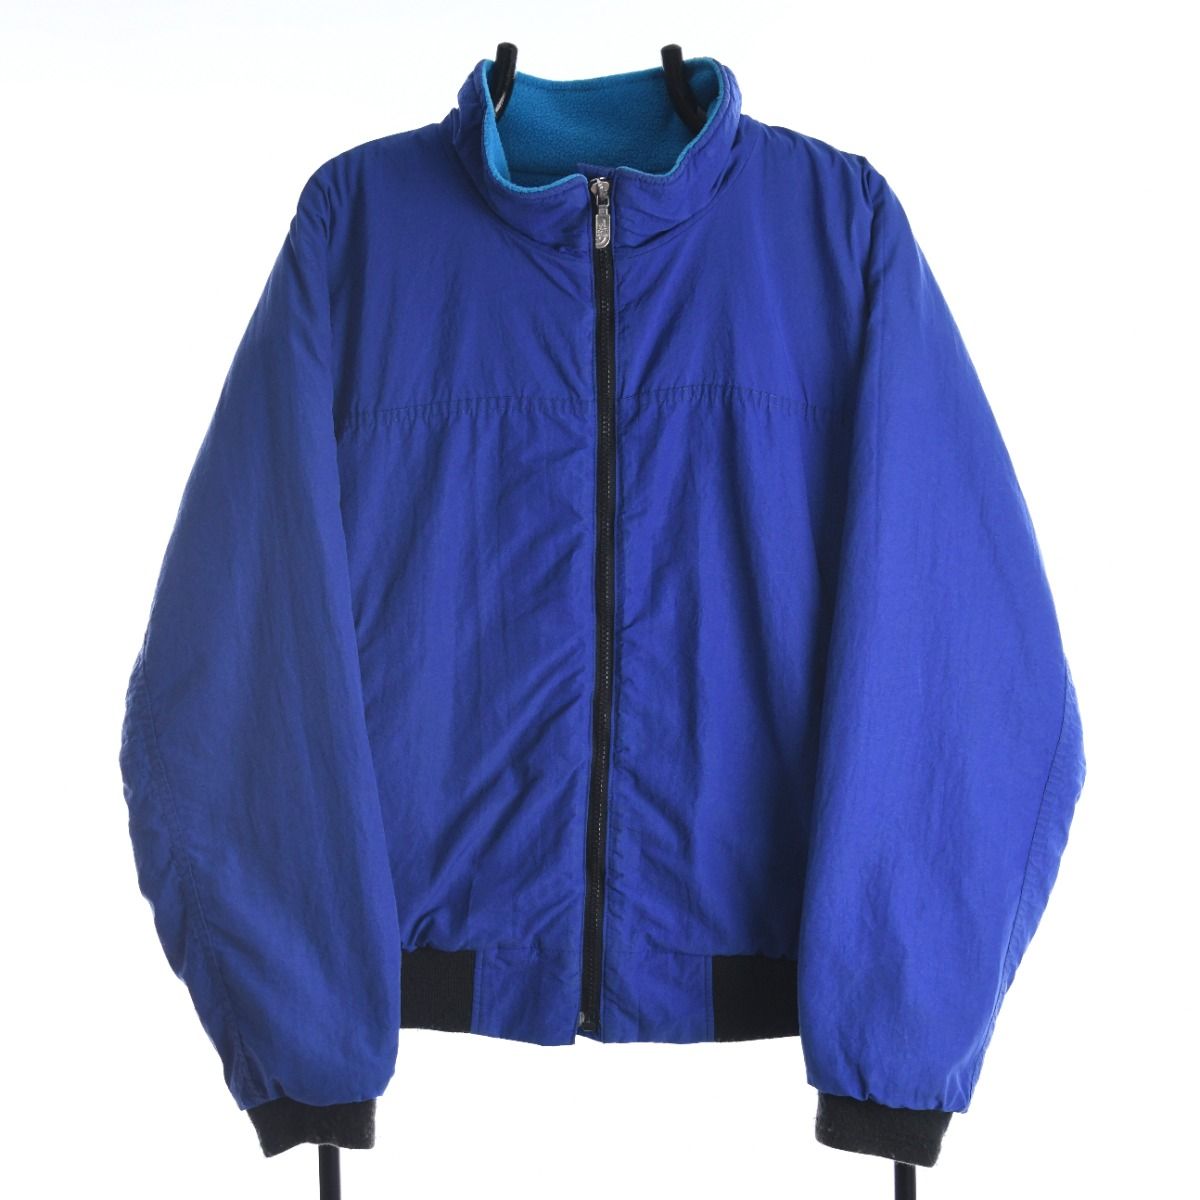 The North Face 1980s Jacket